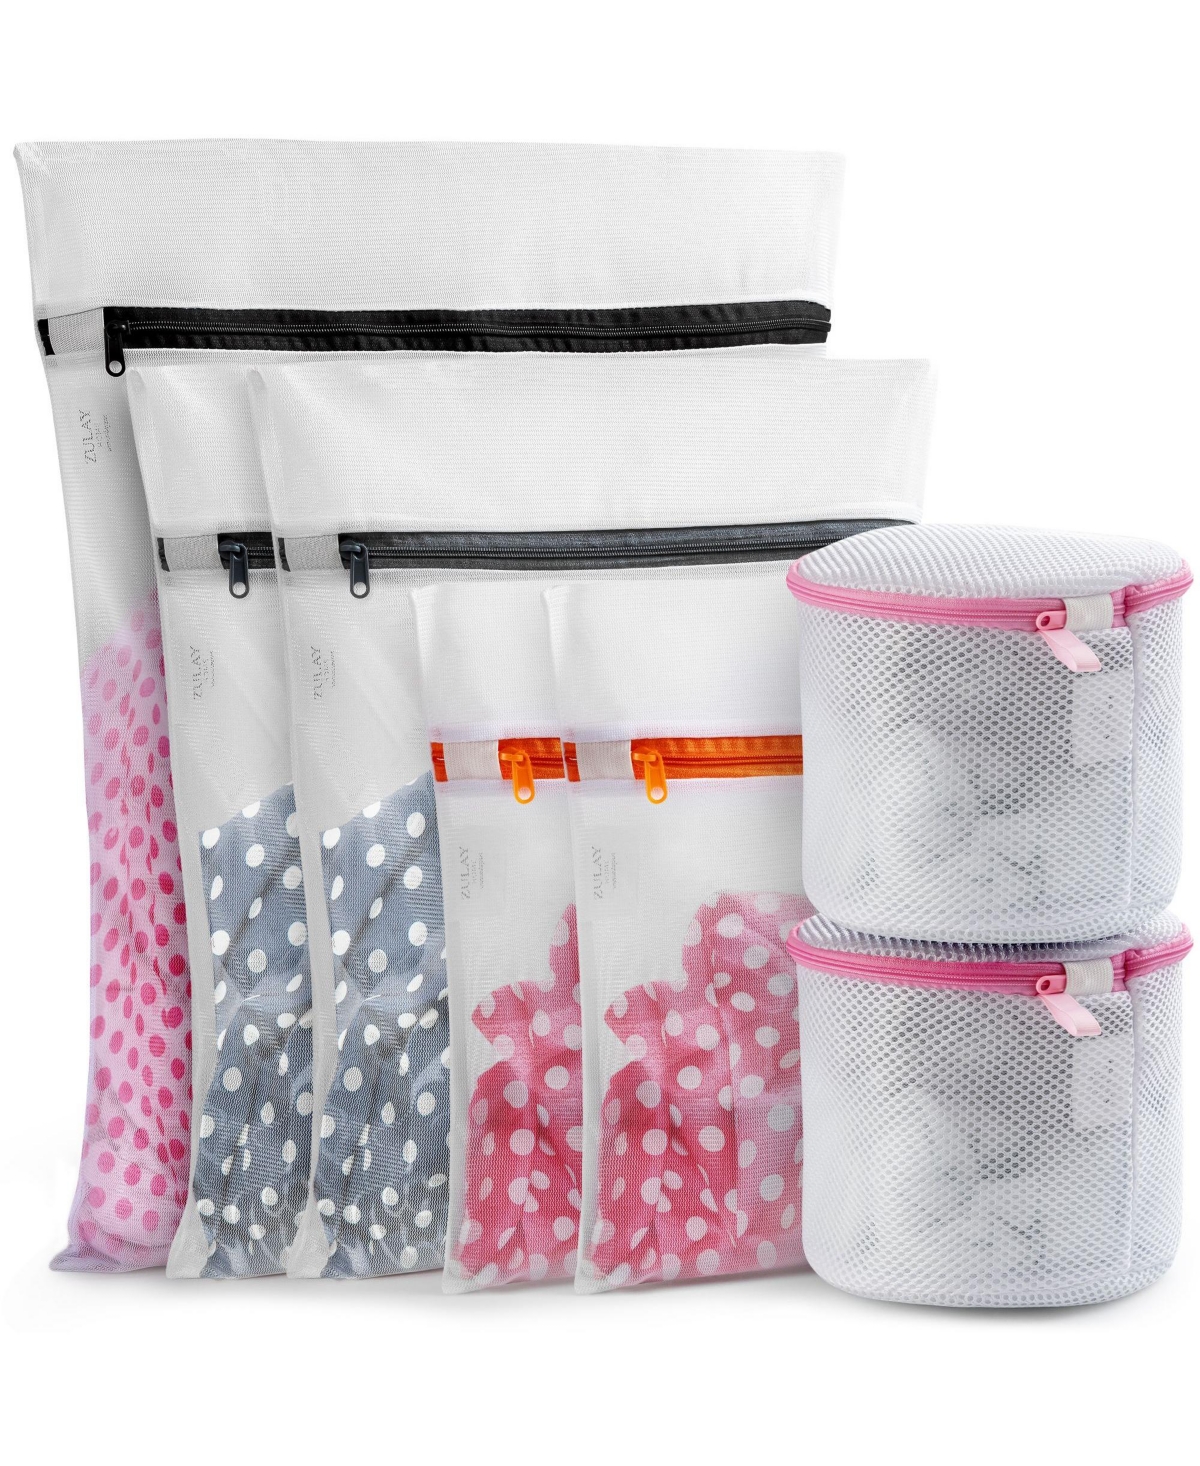 7 Pack Reusable Mesh Laundry Bags for Delicates (2 Small, 2 Medium, 1 Large, 2 Bra Bags) - Assorted